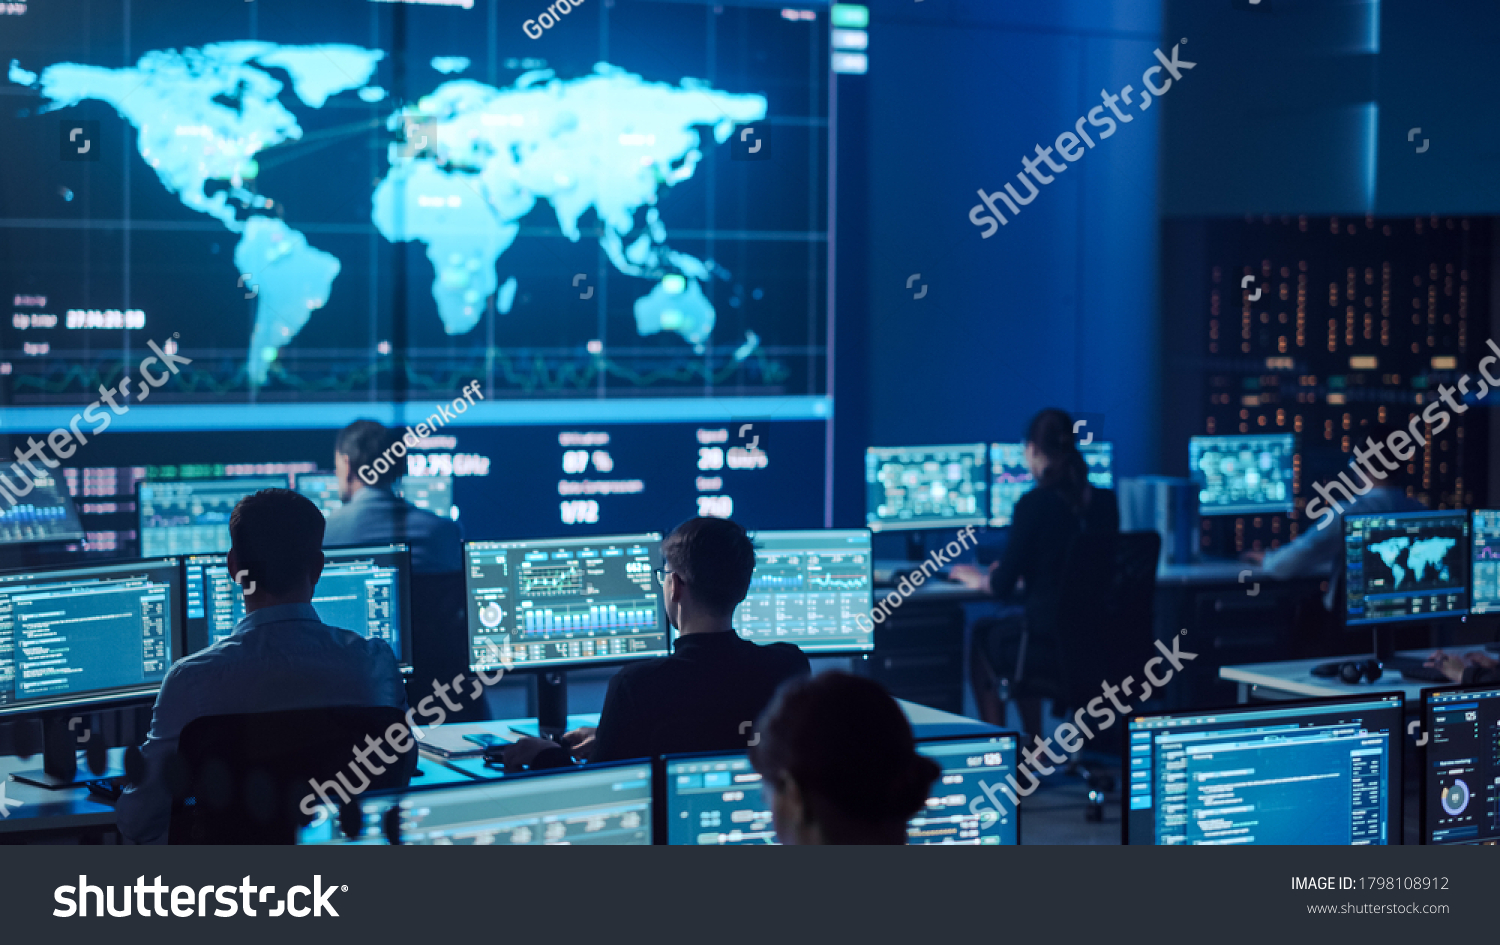 Team of Professional Computer Data Science Engineers Work on Desktops with Screens Showing Charts, Graphs, Infographics, Technical Neural Network Data and Statistics. Dark Control and Monitoring Room. #1798108912